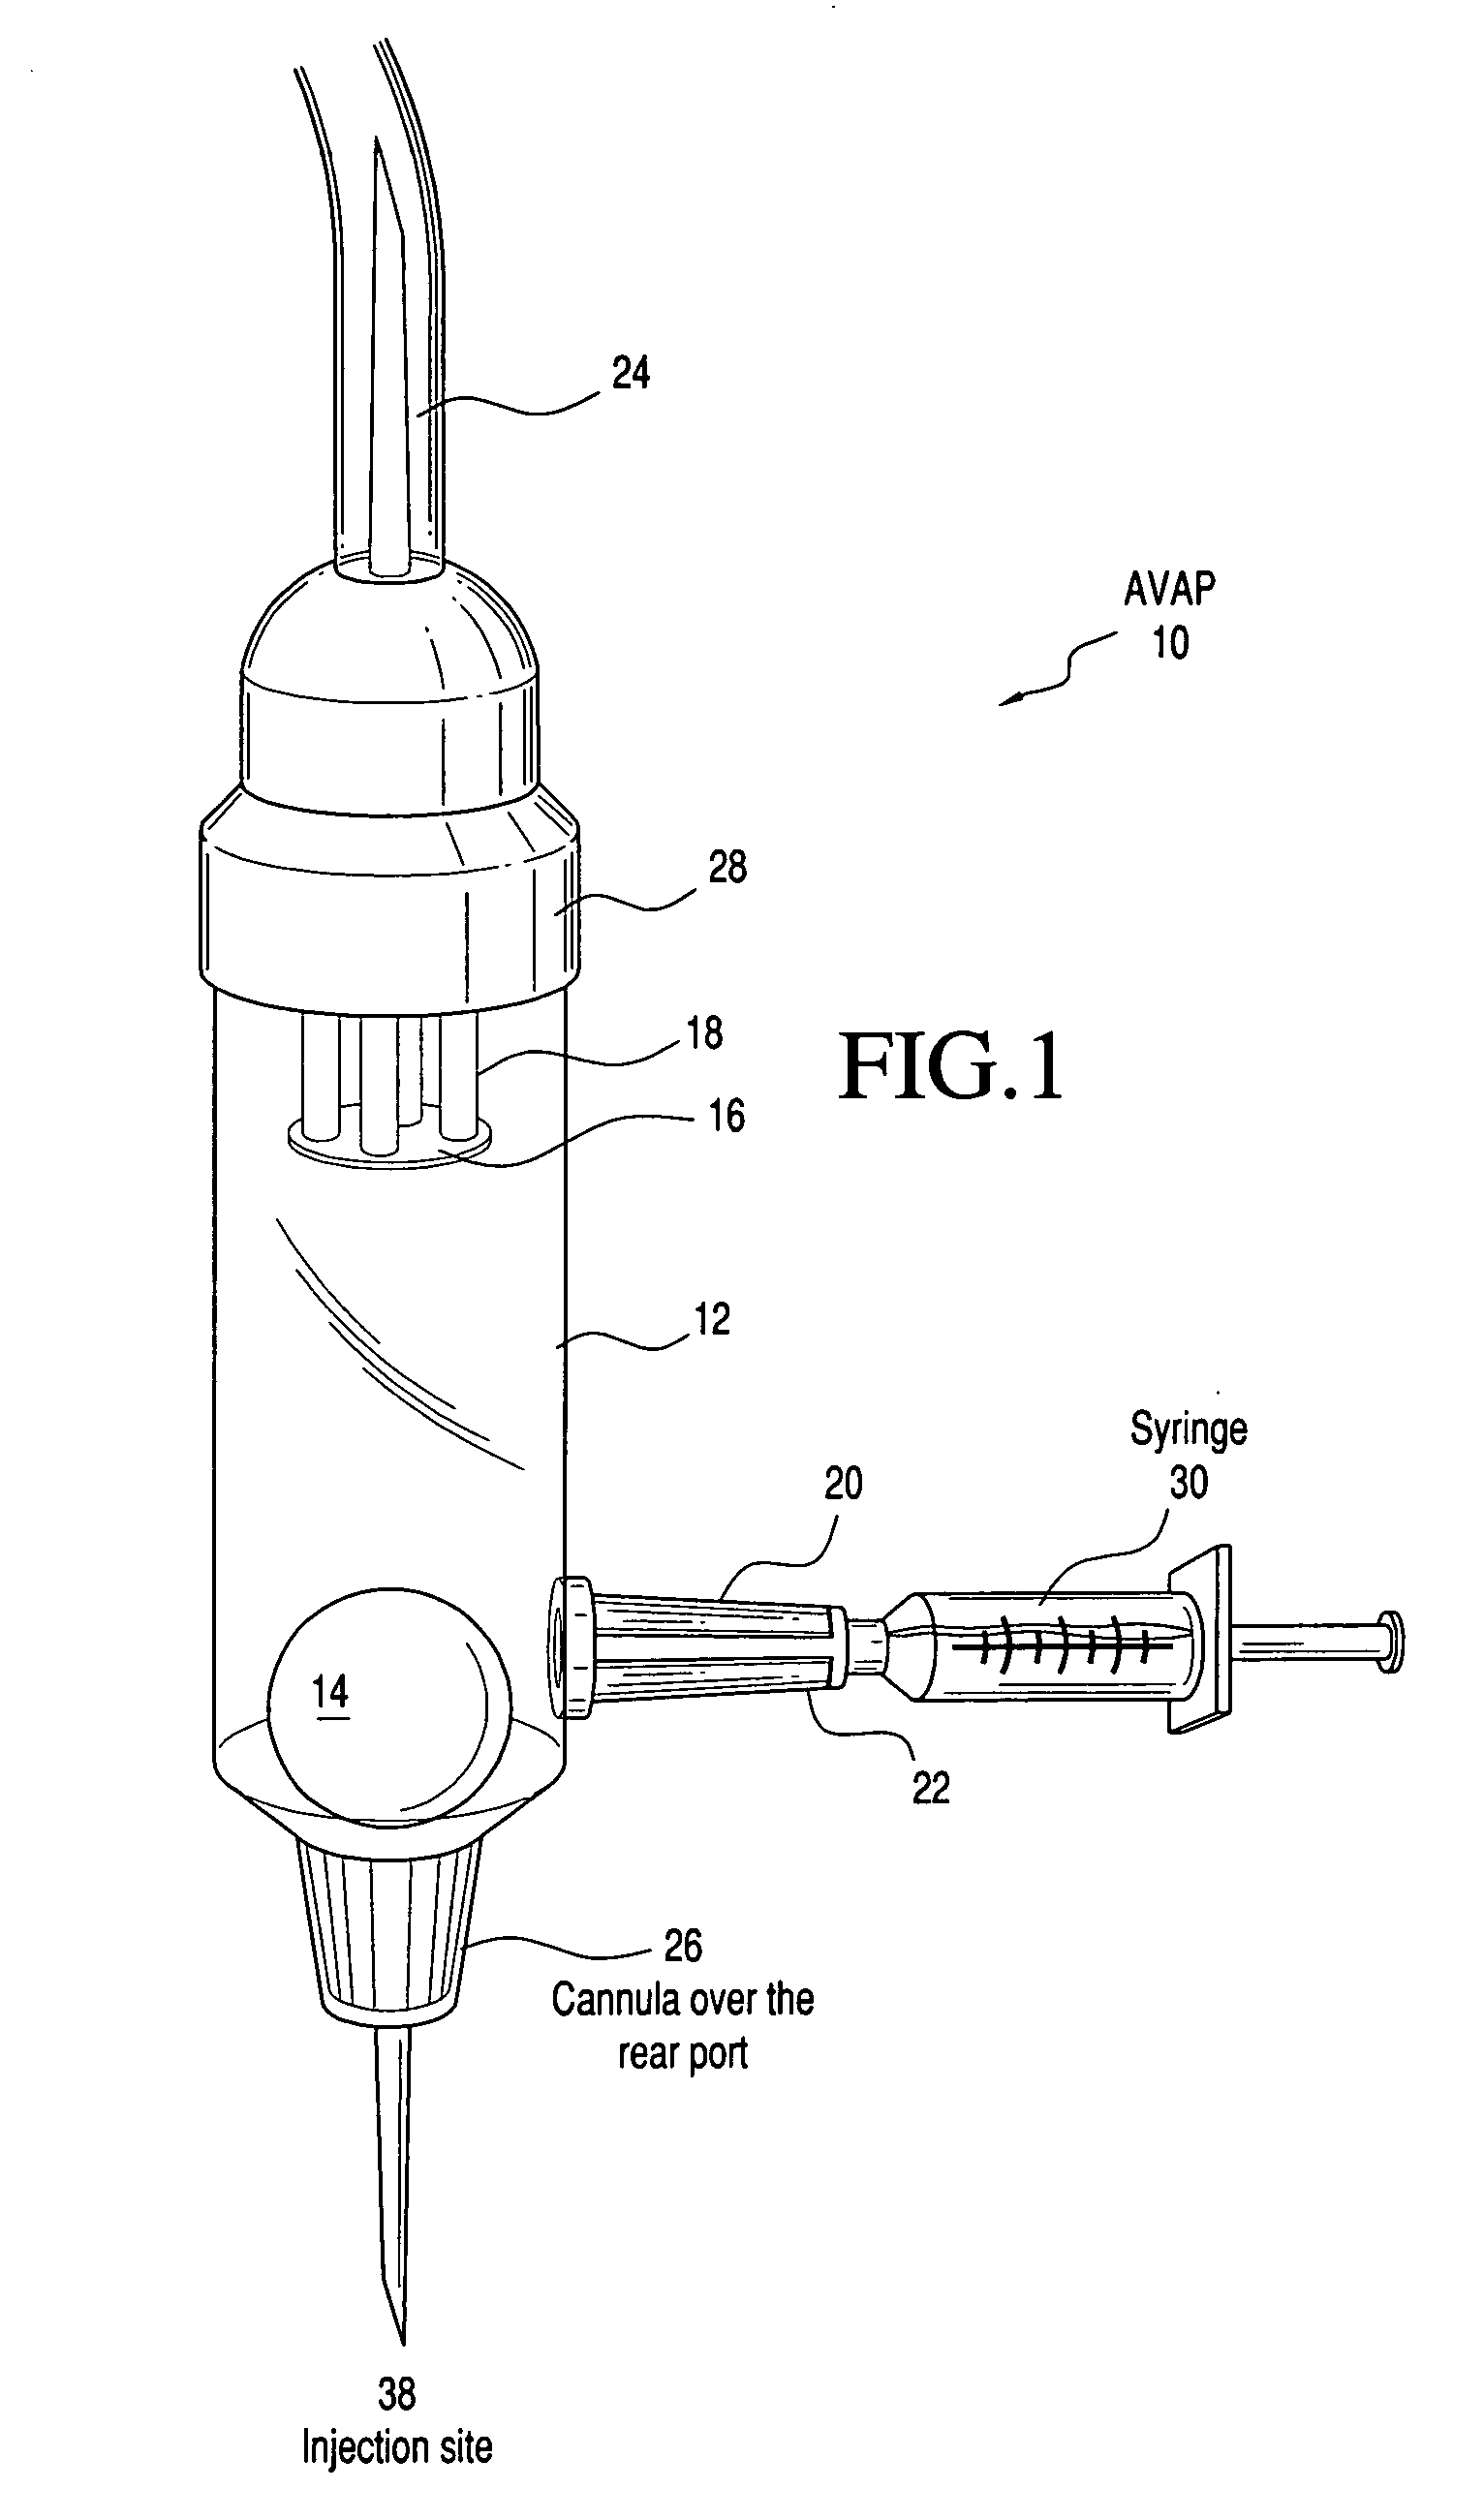 AVAP: air valve and port for intravenous (IV) tubing